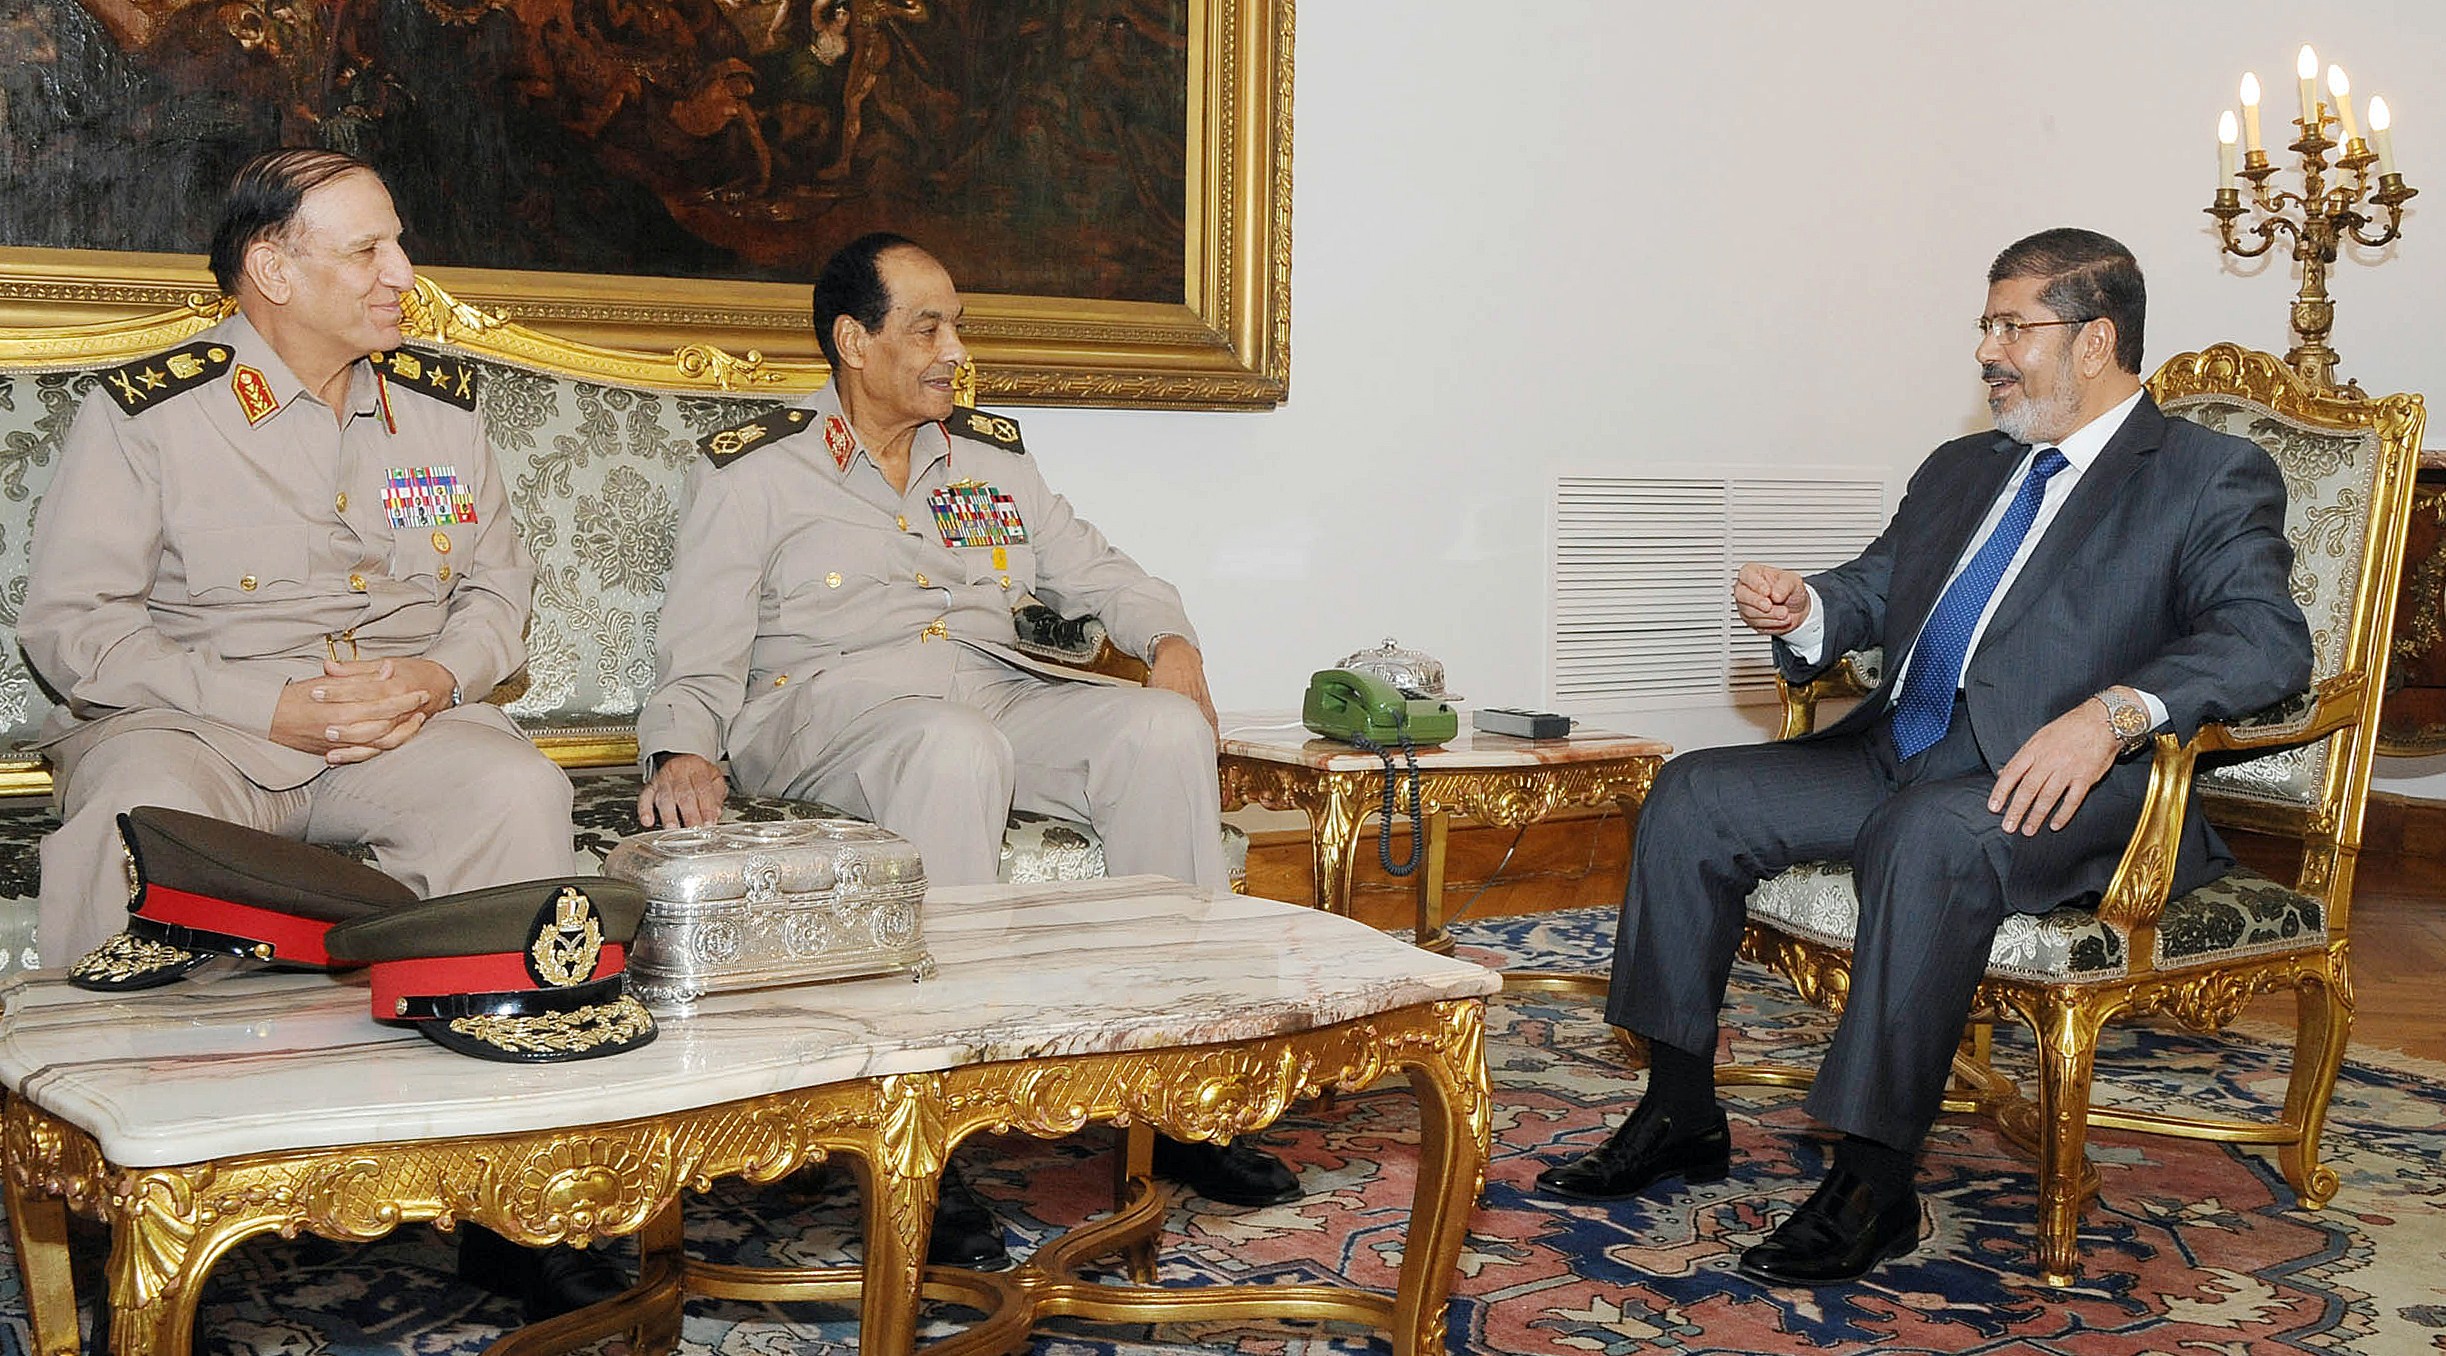 President Mohamed Morsi (R) meets with retired former Defence Minister and Field Marshall Hussein Tantawi (C), and retired Armed Forces Chief of Staff, Sami Anan (L) at the presidential palace in Cairo on 14 August AFP PHOTO / HO / MENA